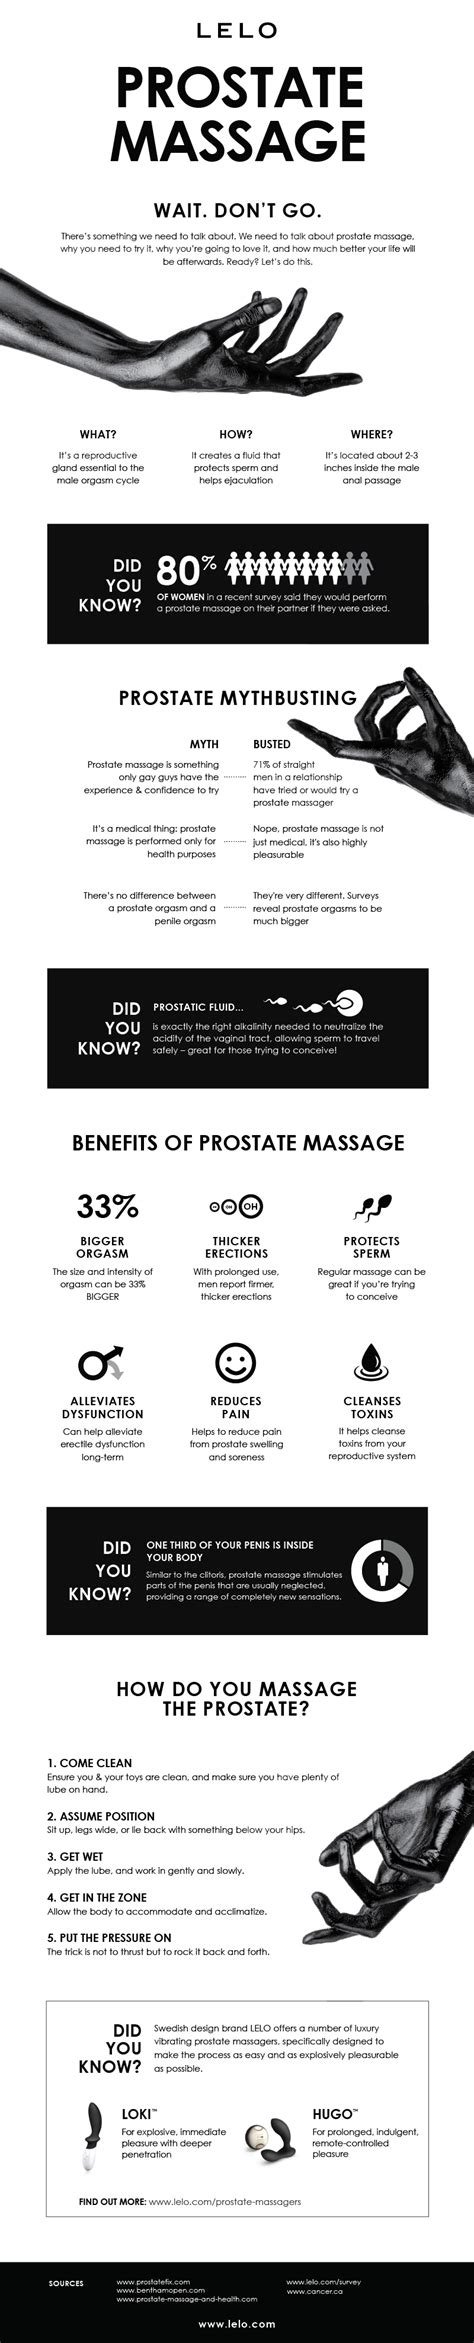 how to prostate massage telegraph